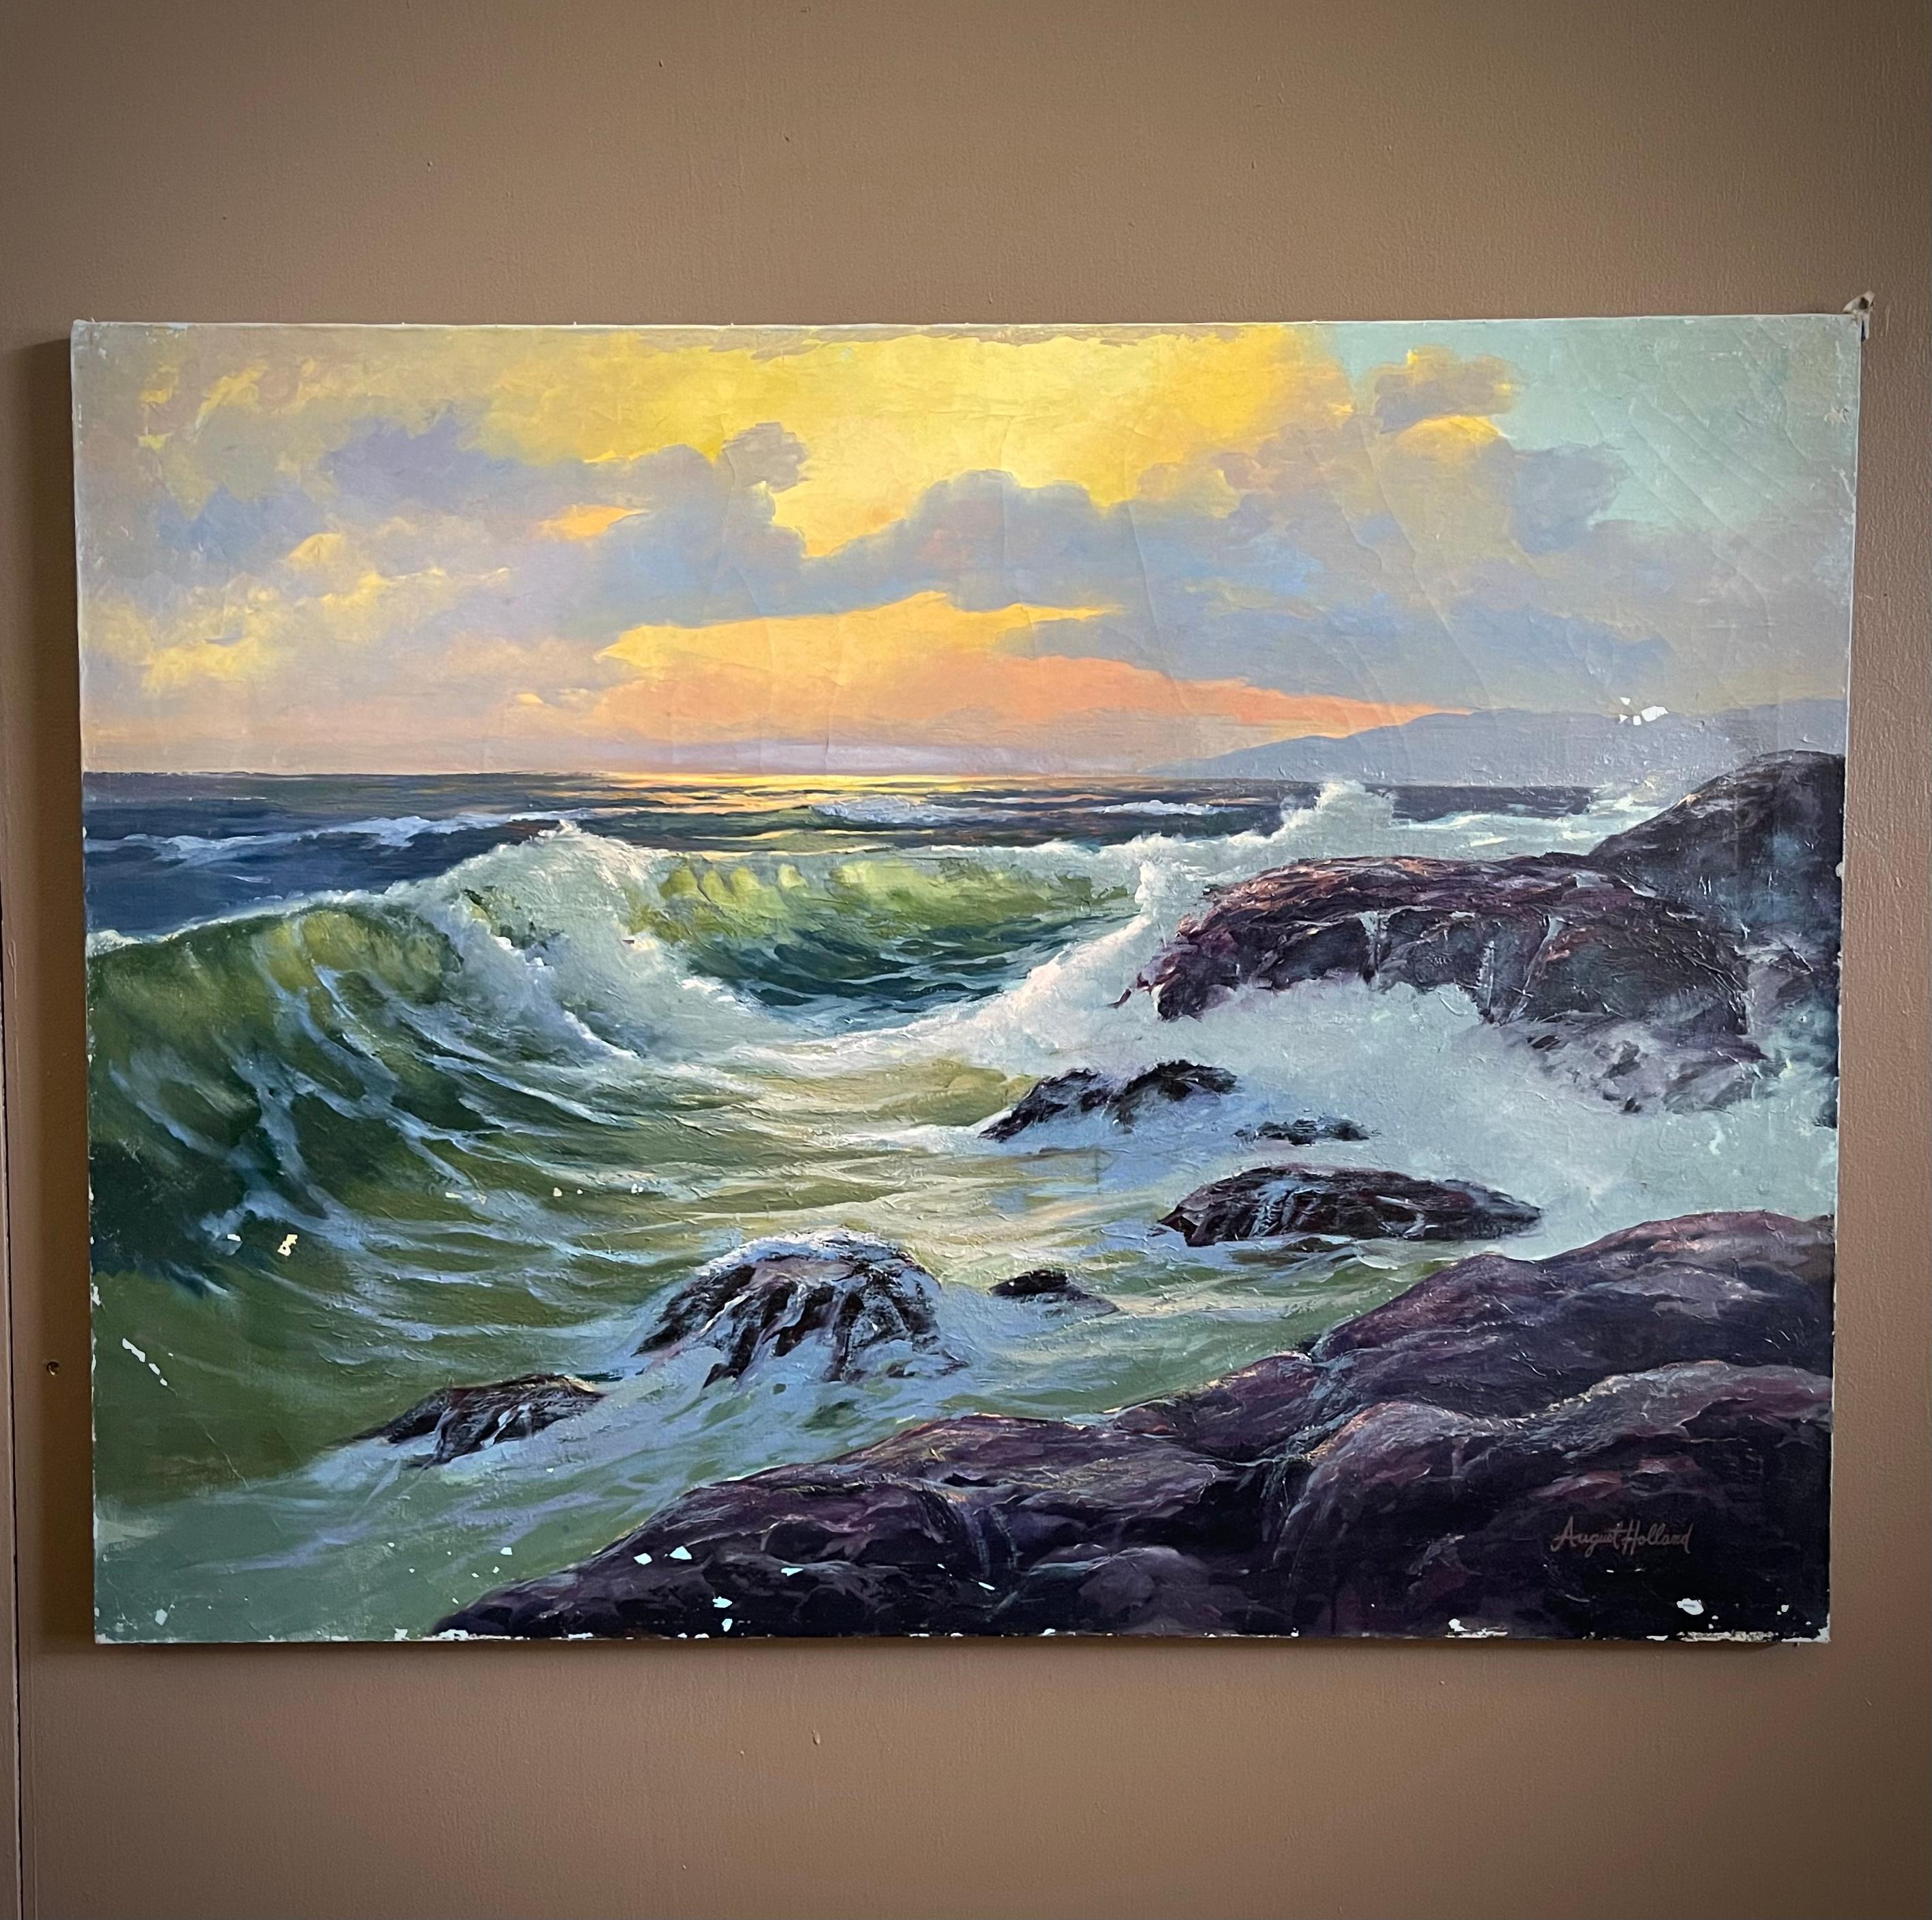 Capture the raw power and beauty of the ocean with this stunning postmodern oil painting by Illinois-born artist August Holland. Born in 1928, Holland began at a very early age mixing colors and painting with his uncle, an artist himself. Not long